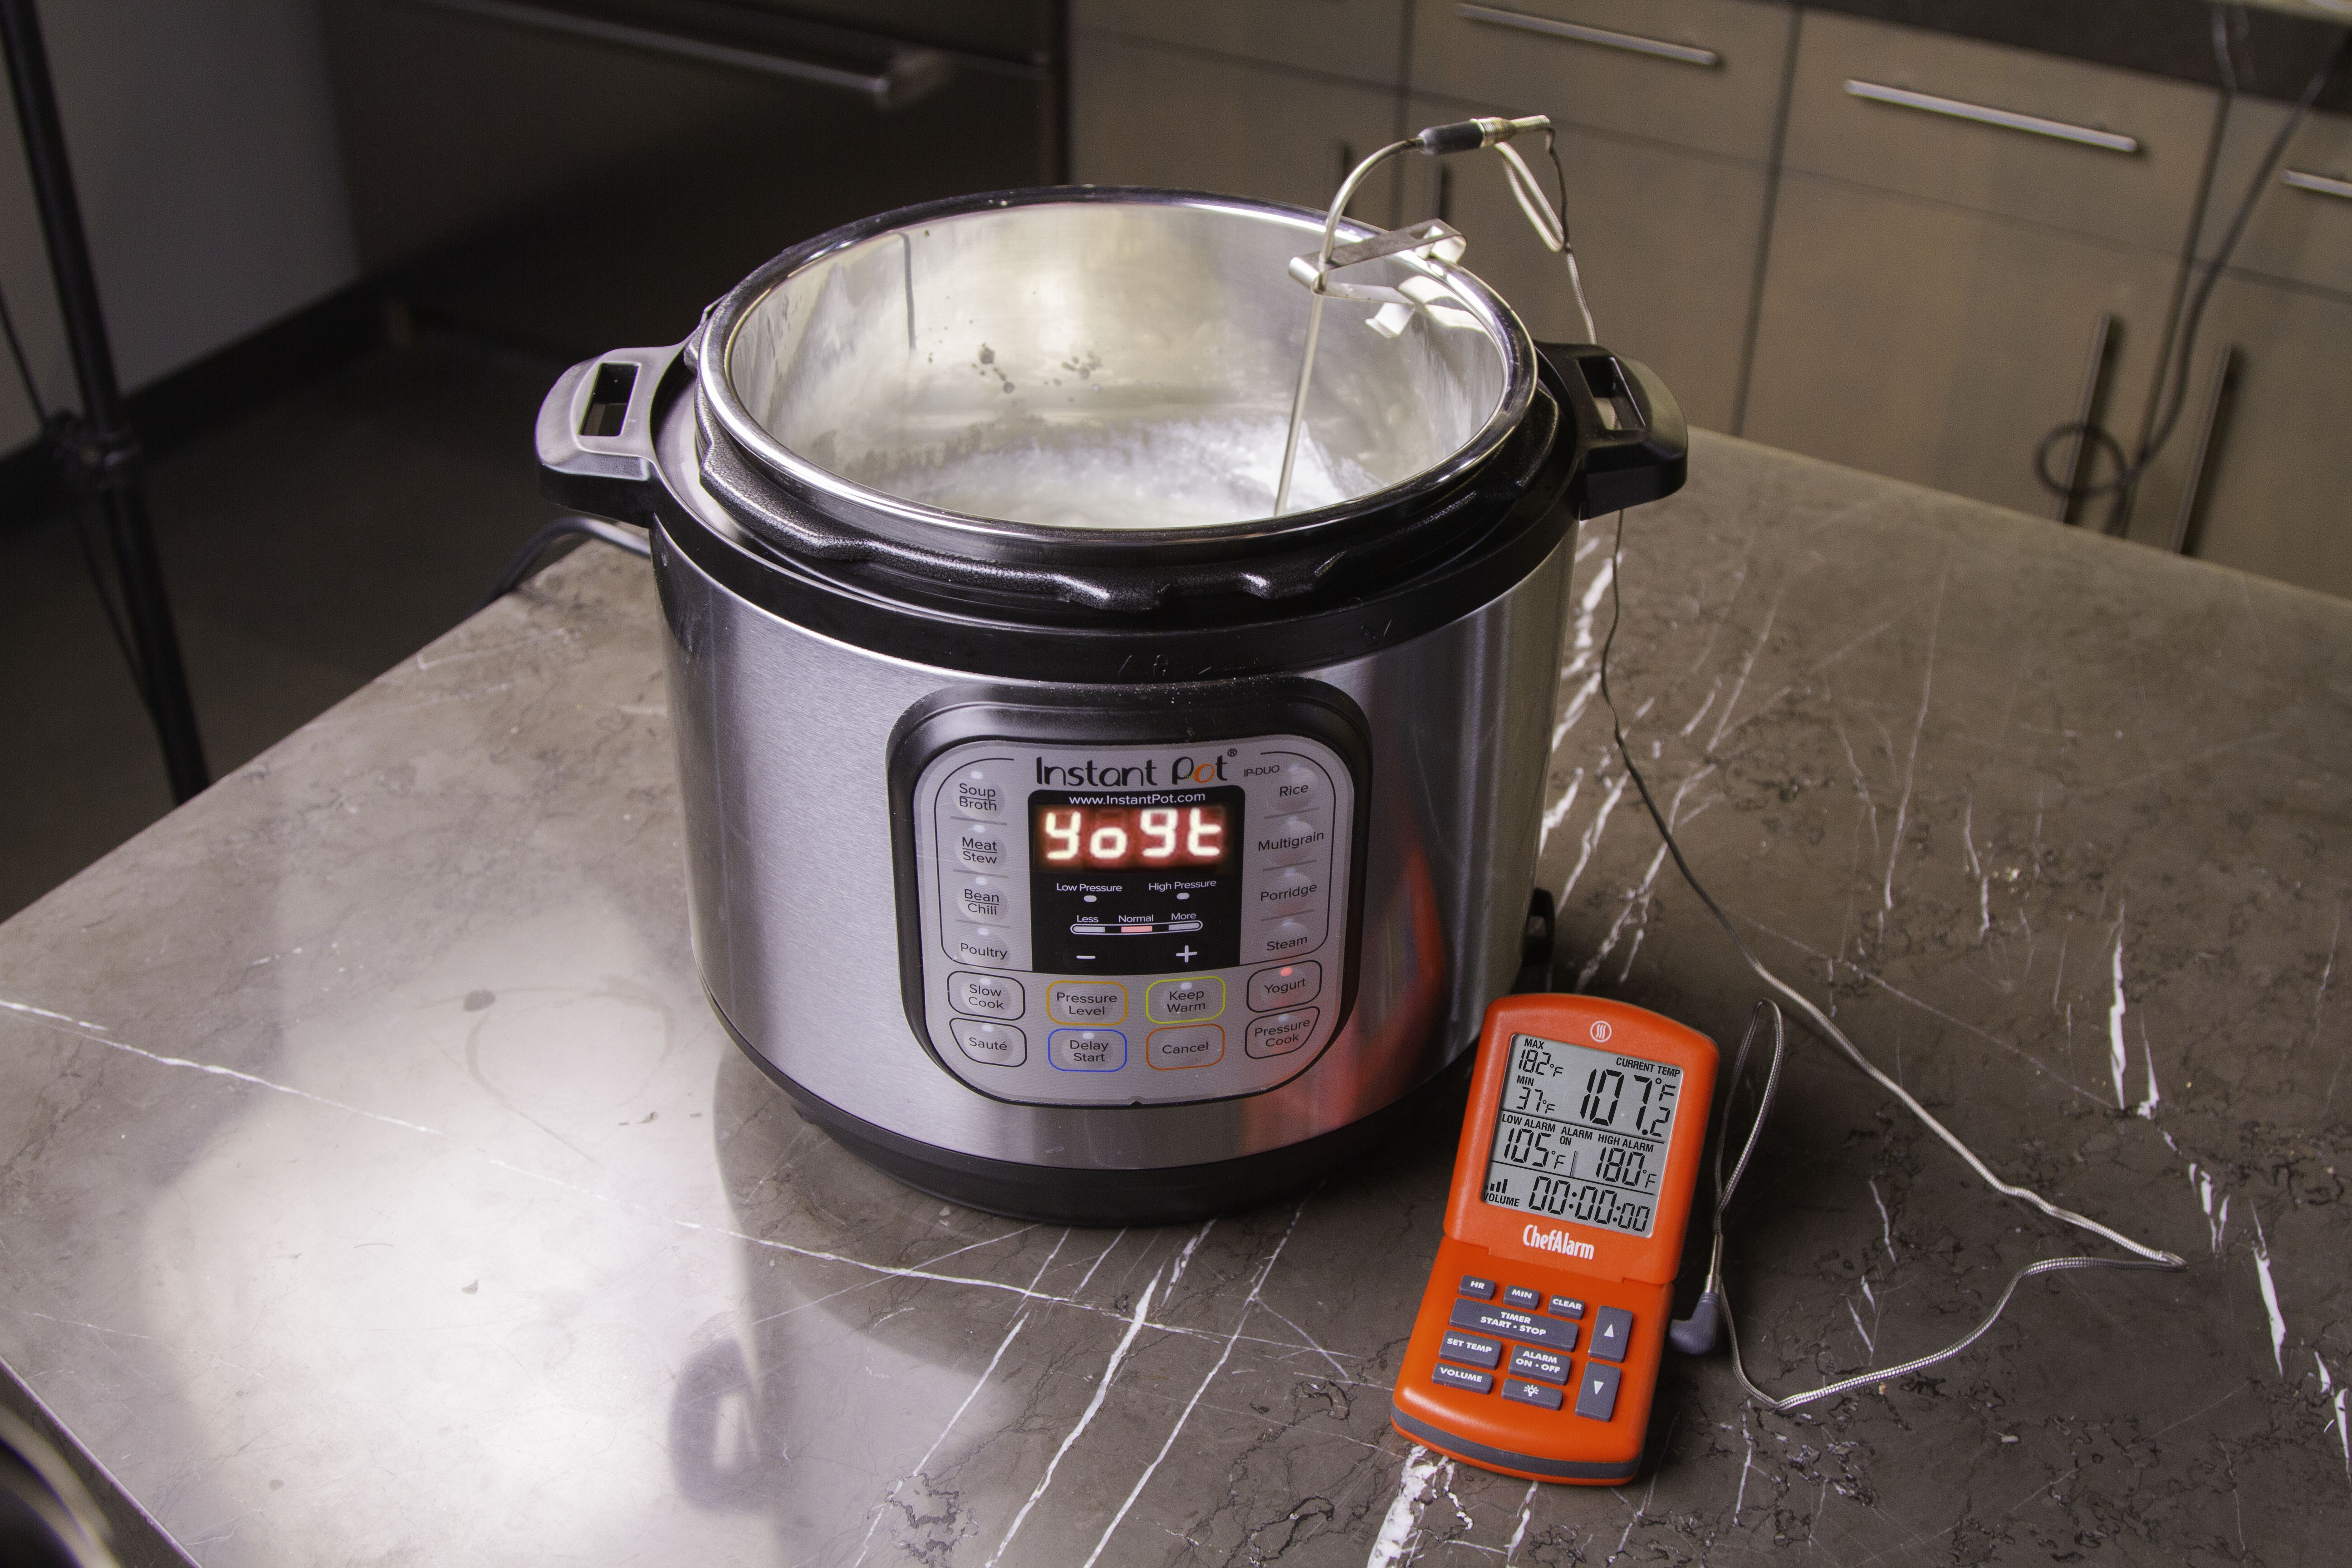 Food Safety Tips for Electric Multi-Cookers